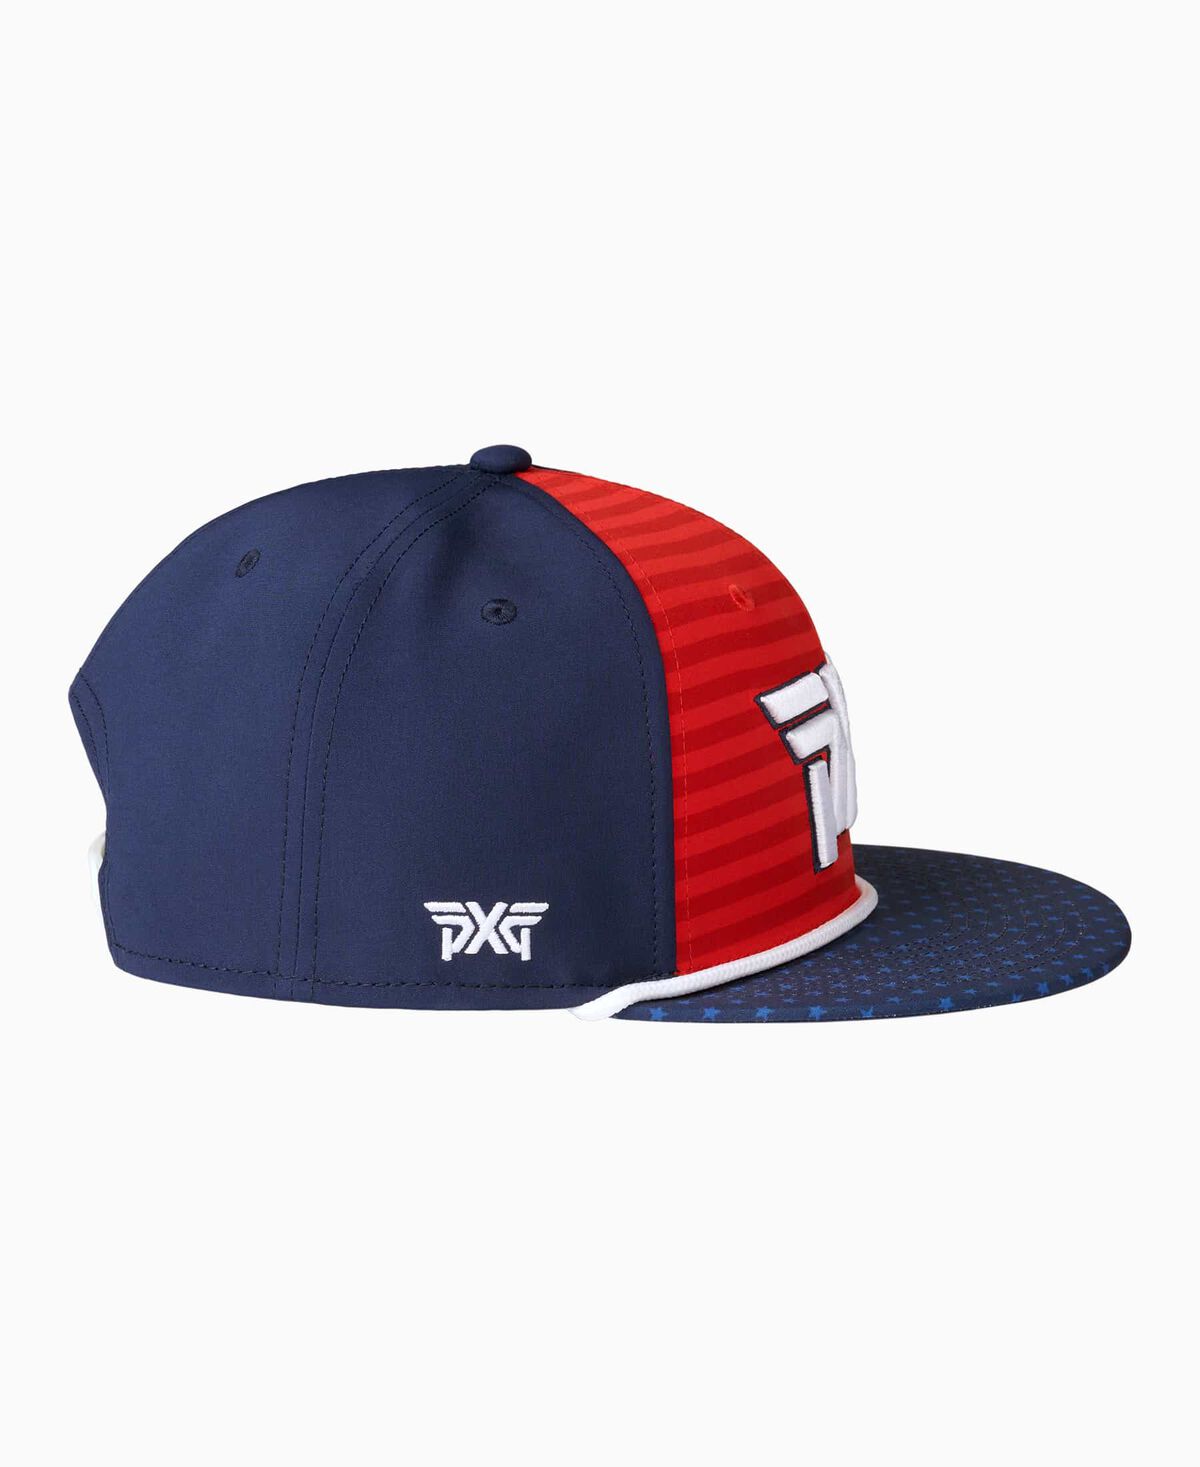 2024 Stars & Stripes 6-Panel Adjustable Flat Bill Cap - Red - One Size Red